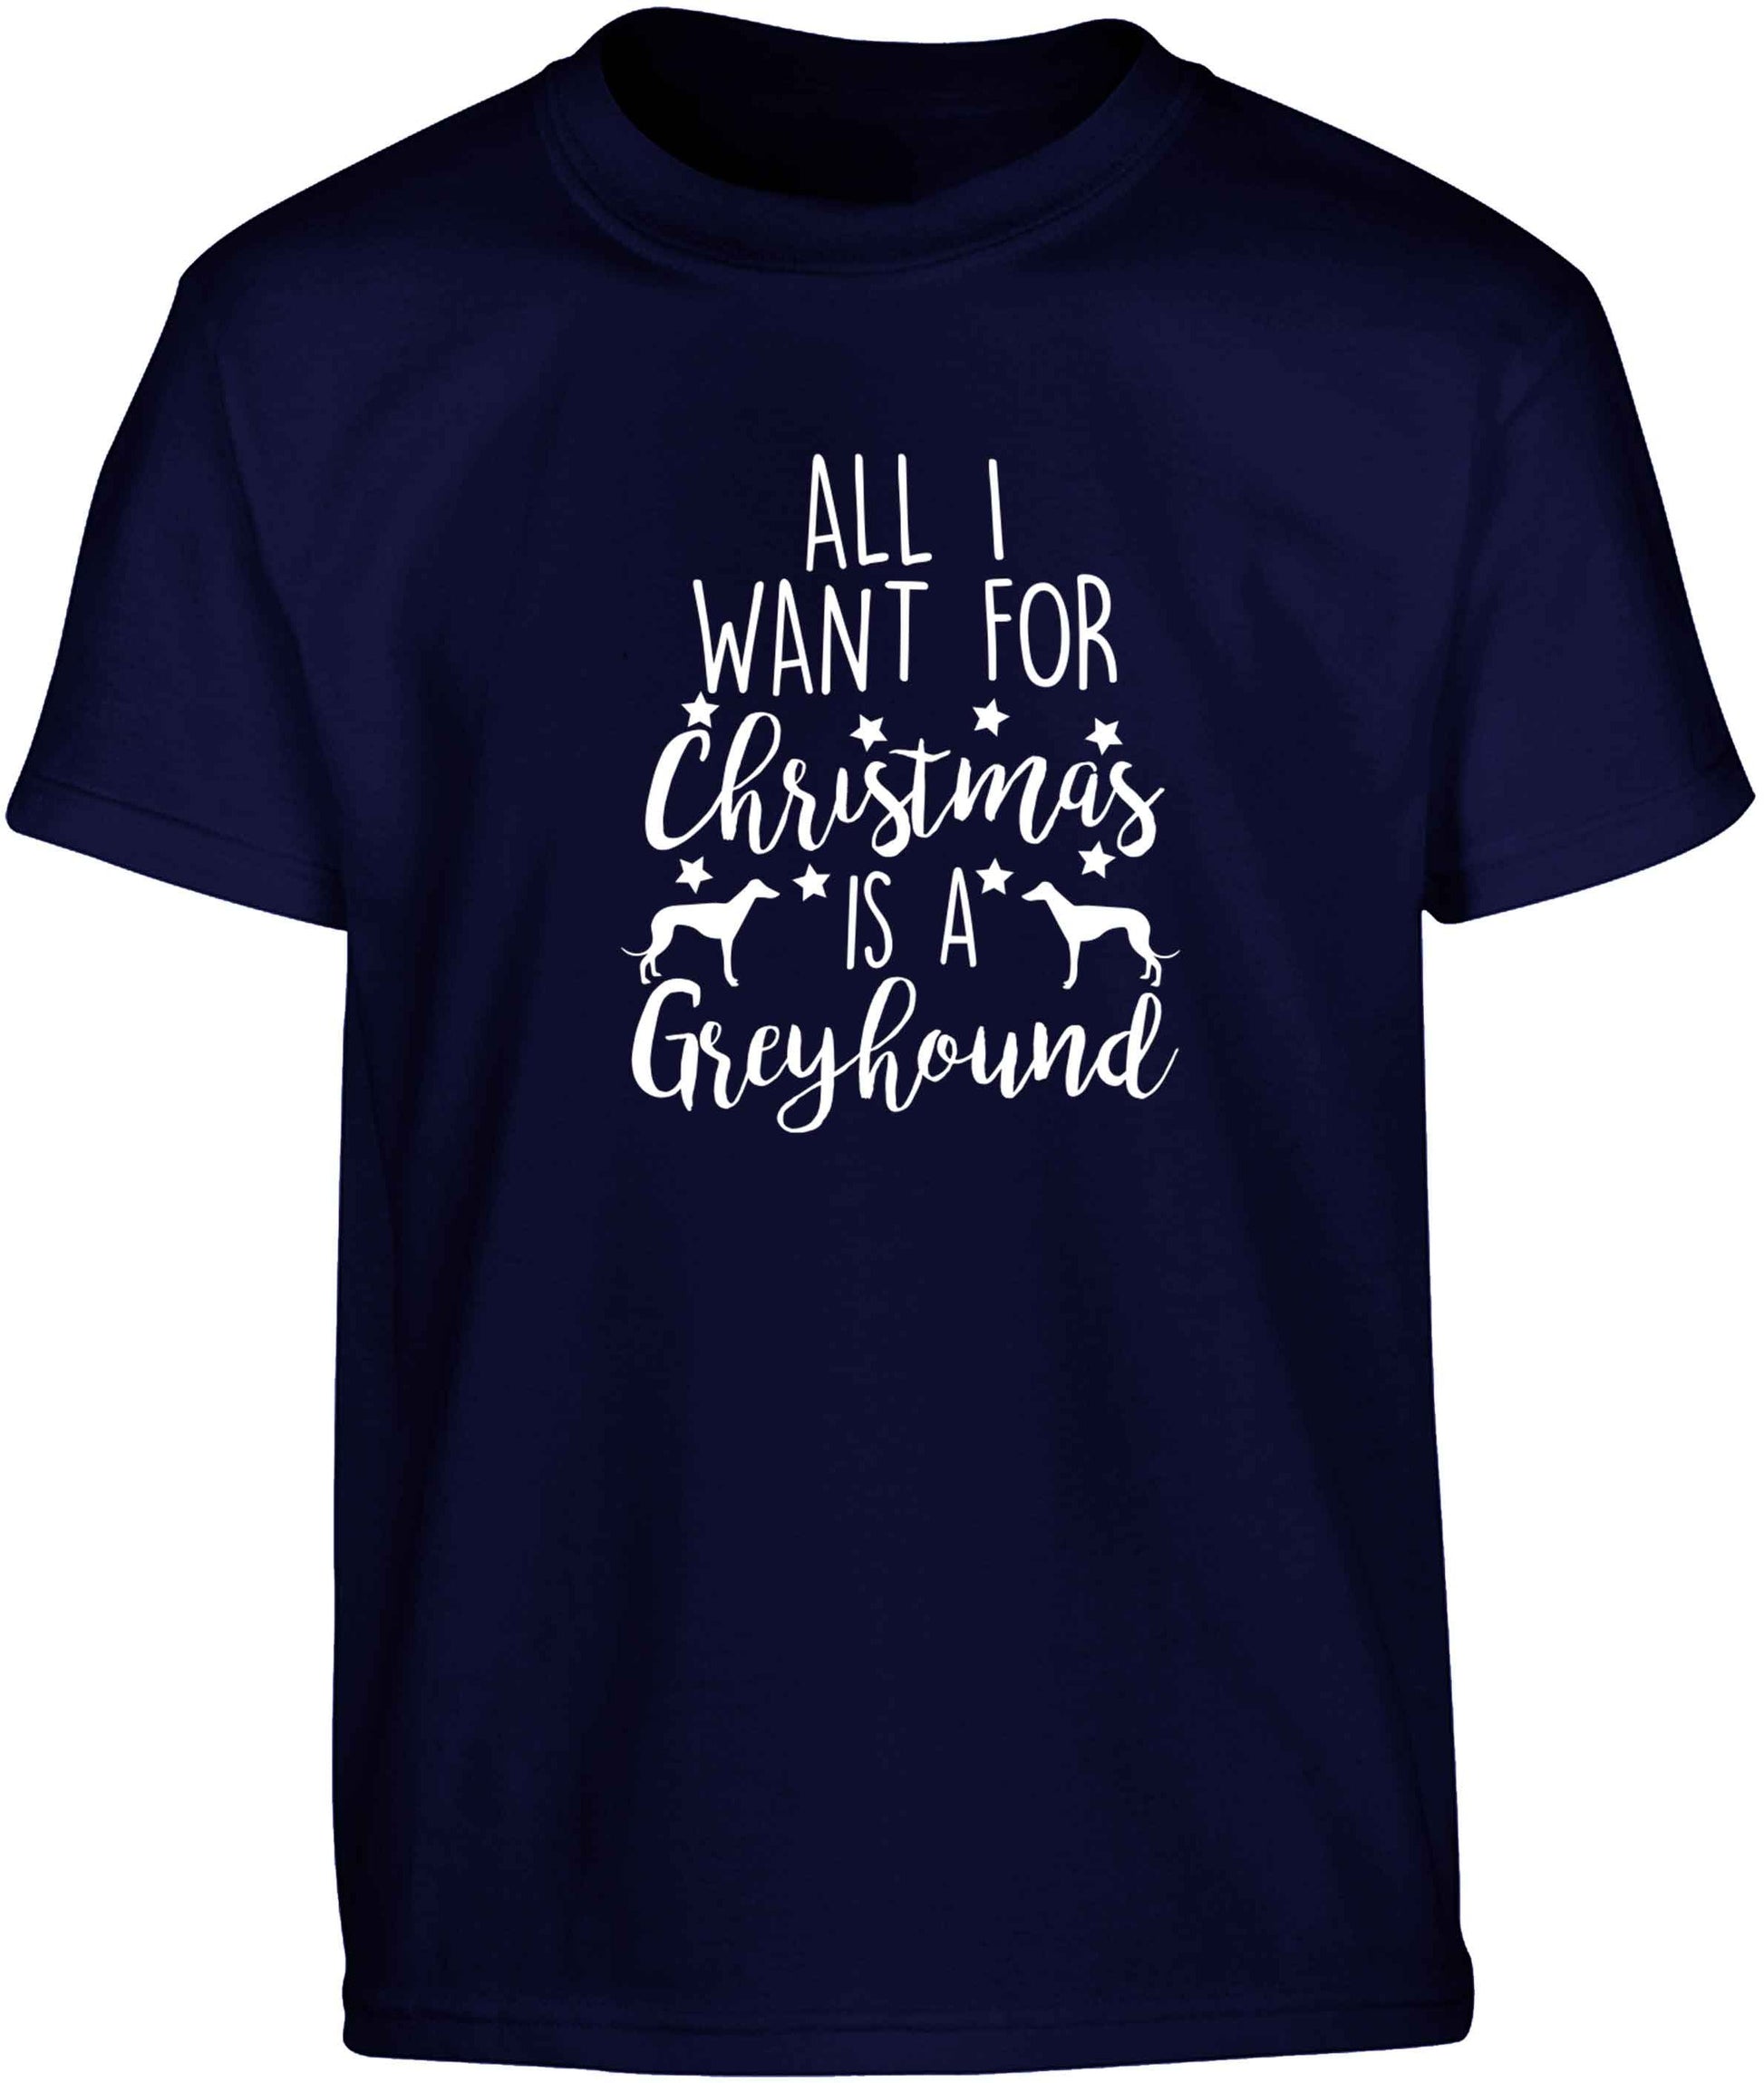 All I want for Christmas is a greyhound Children's navy Tshirt 12-13 Years